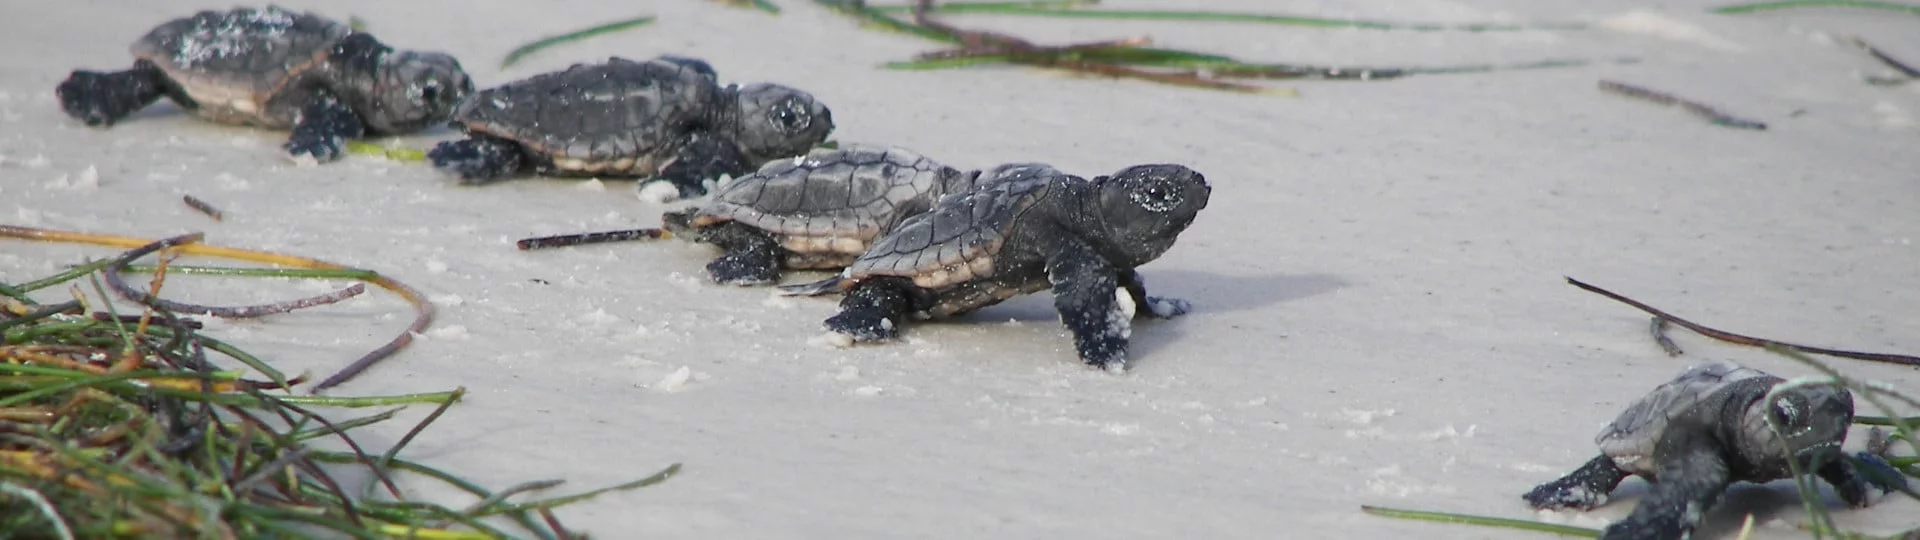 Baby Seaturtles heading to the water on St. George Island